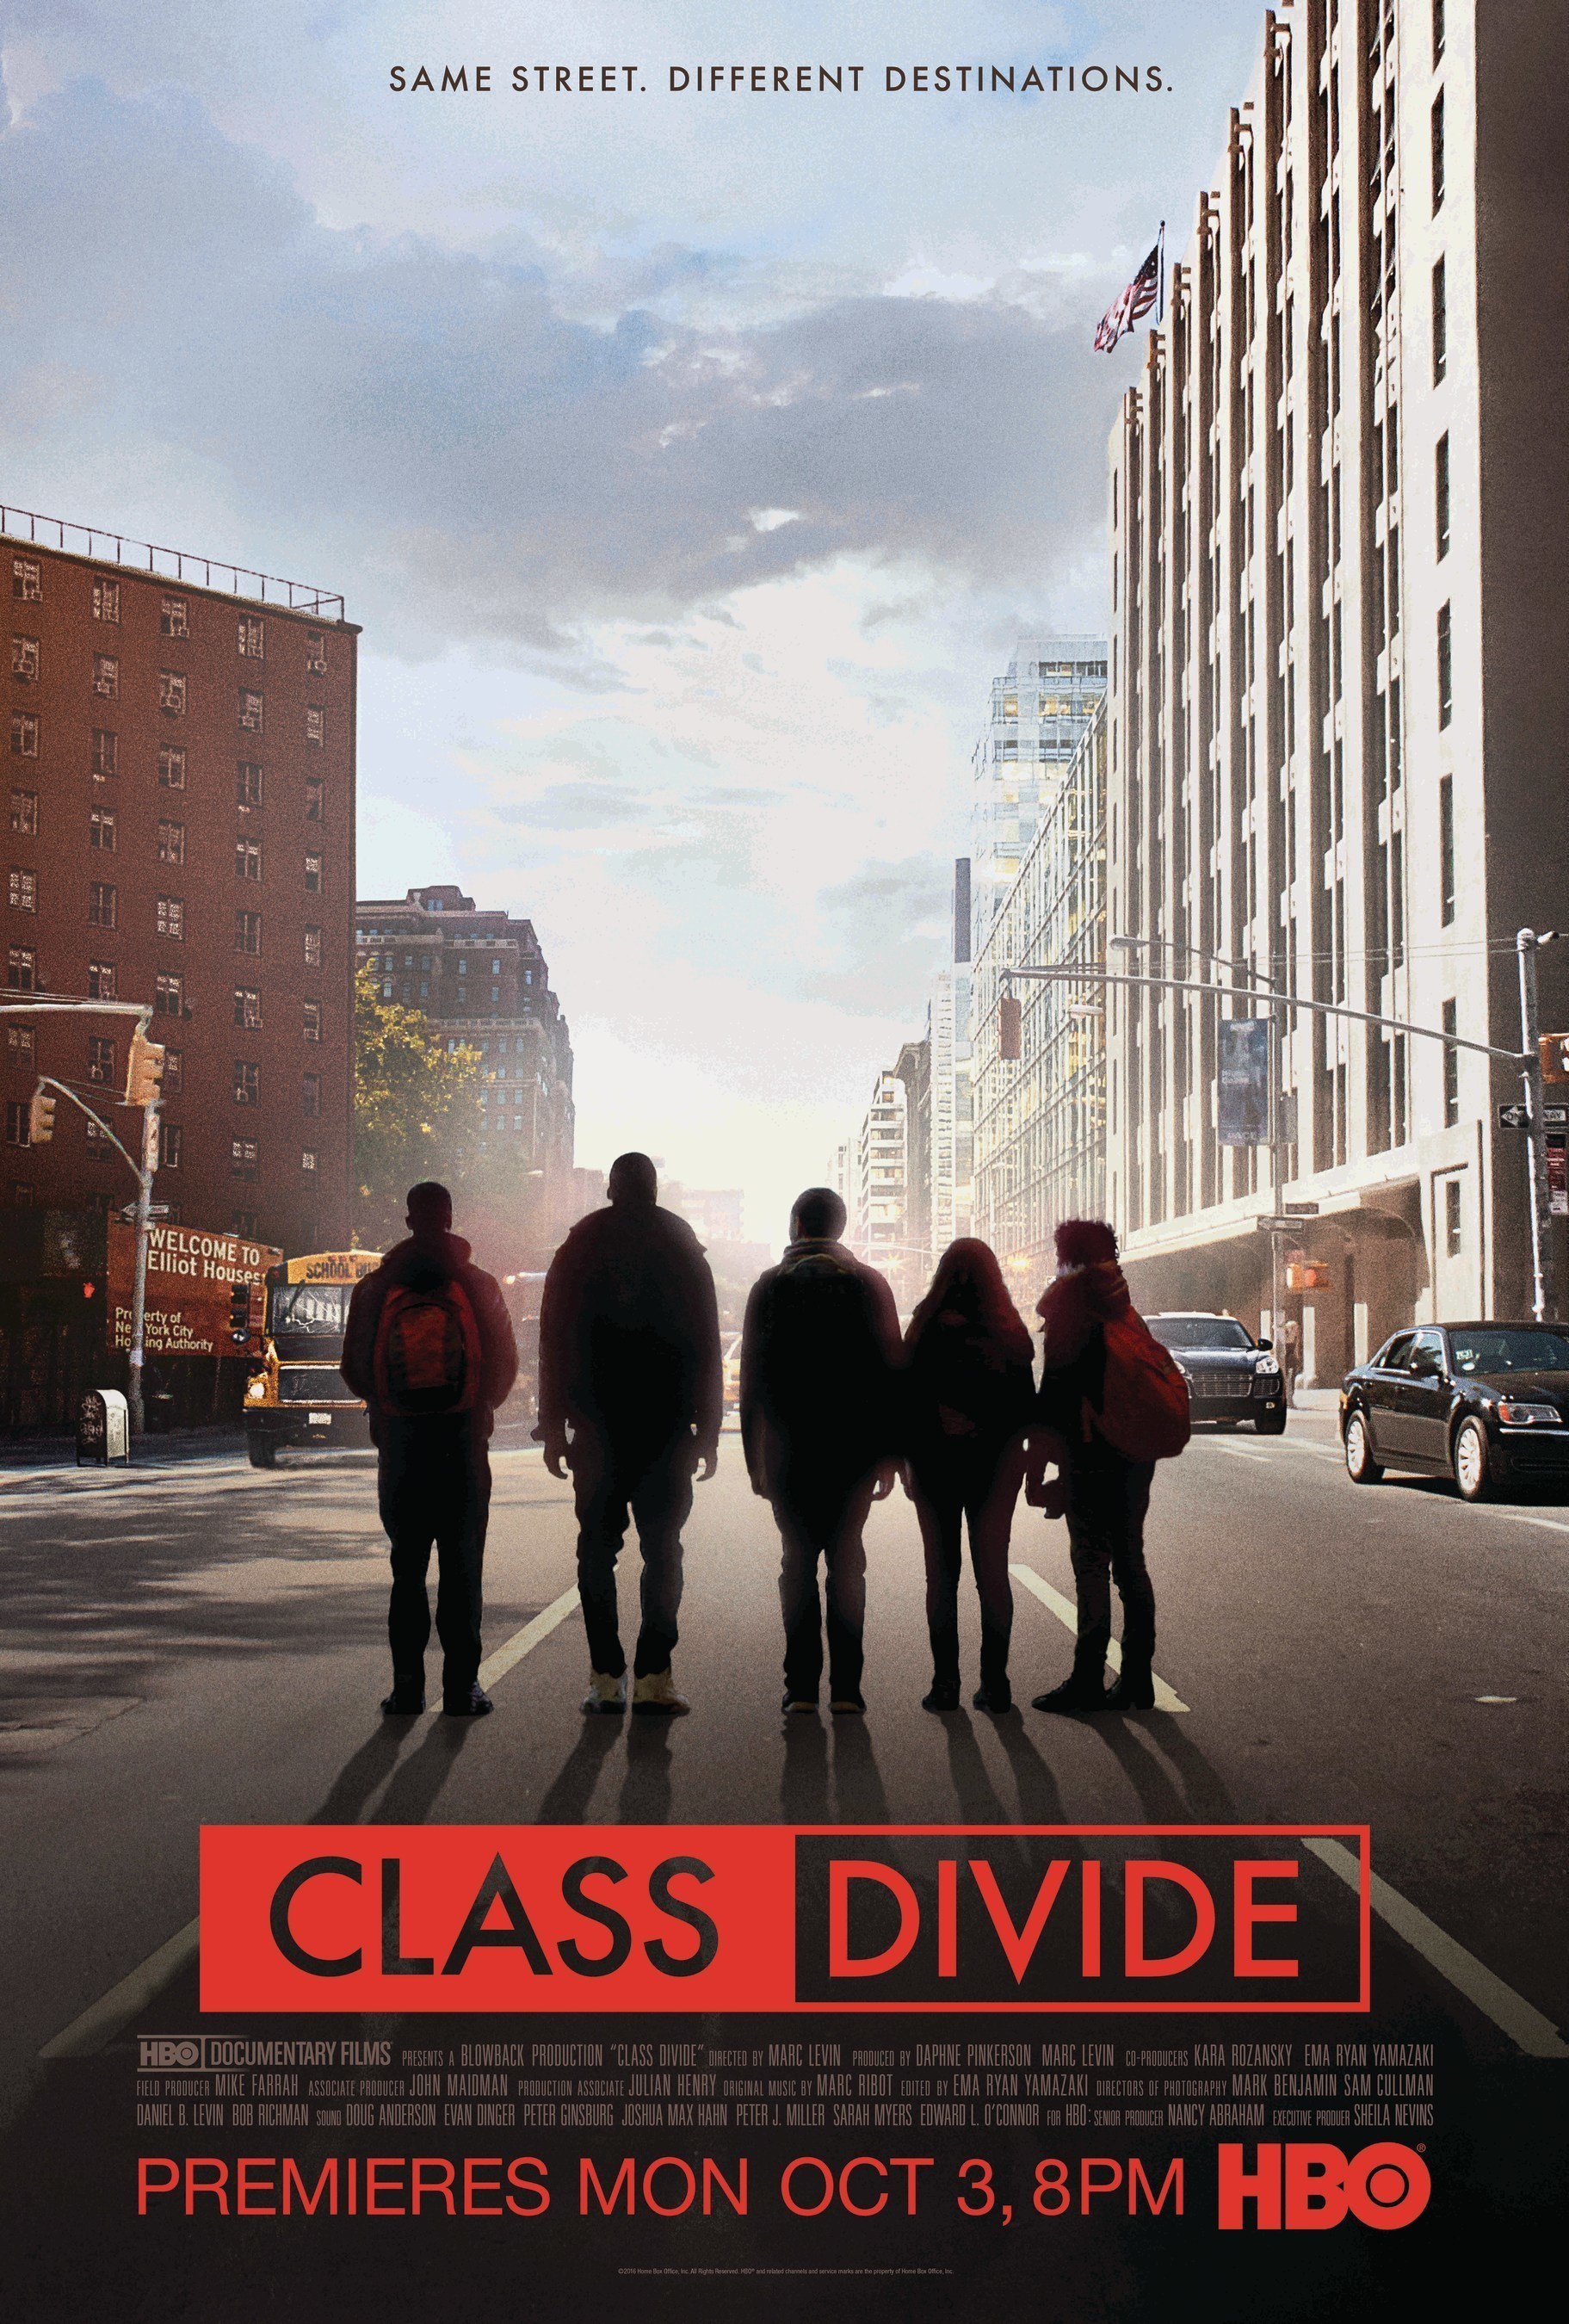 HBO(R) PARTNERS WITH COMMUNITY ORGANIZATIONS FOR A PHOTO GALLERY EXPERIENCE ON THE HIGH LINE IN NYC, INSPIRED BY NEW DOCUMENTARY FILM CLASS DIVIDE